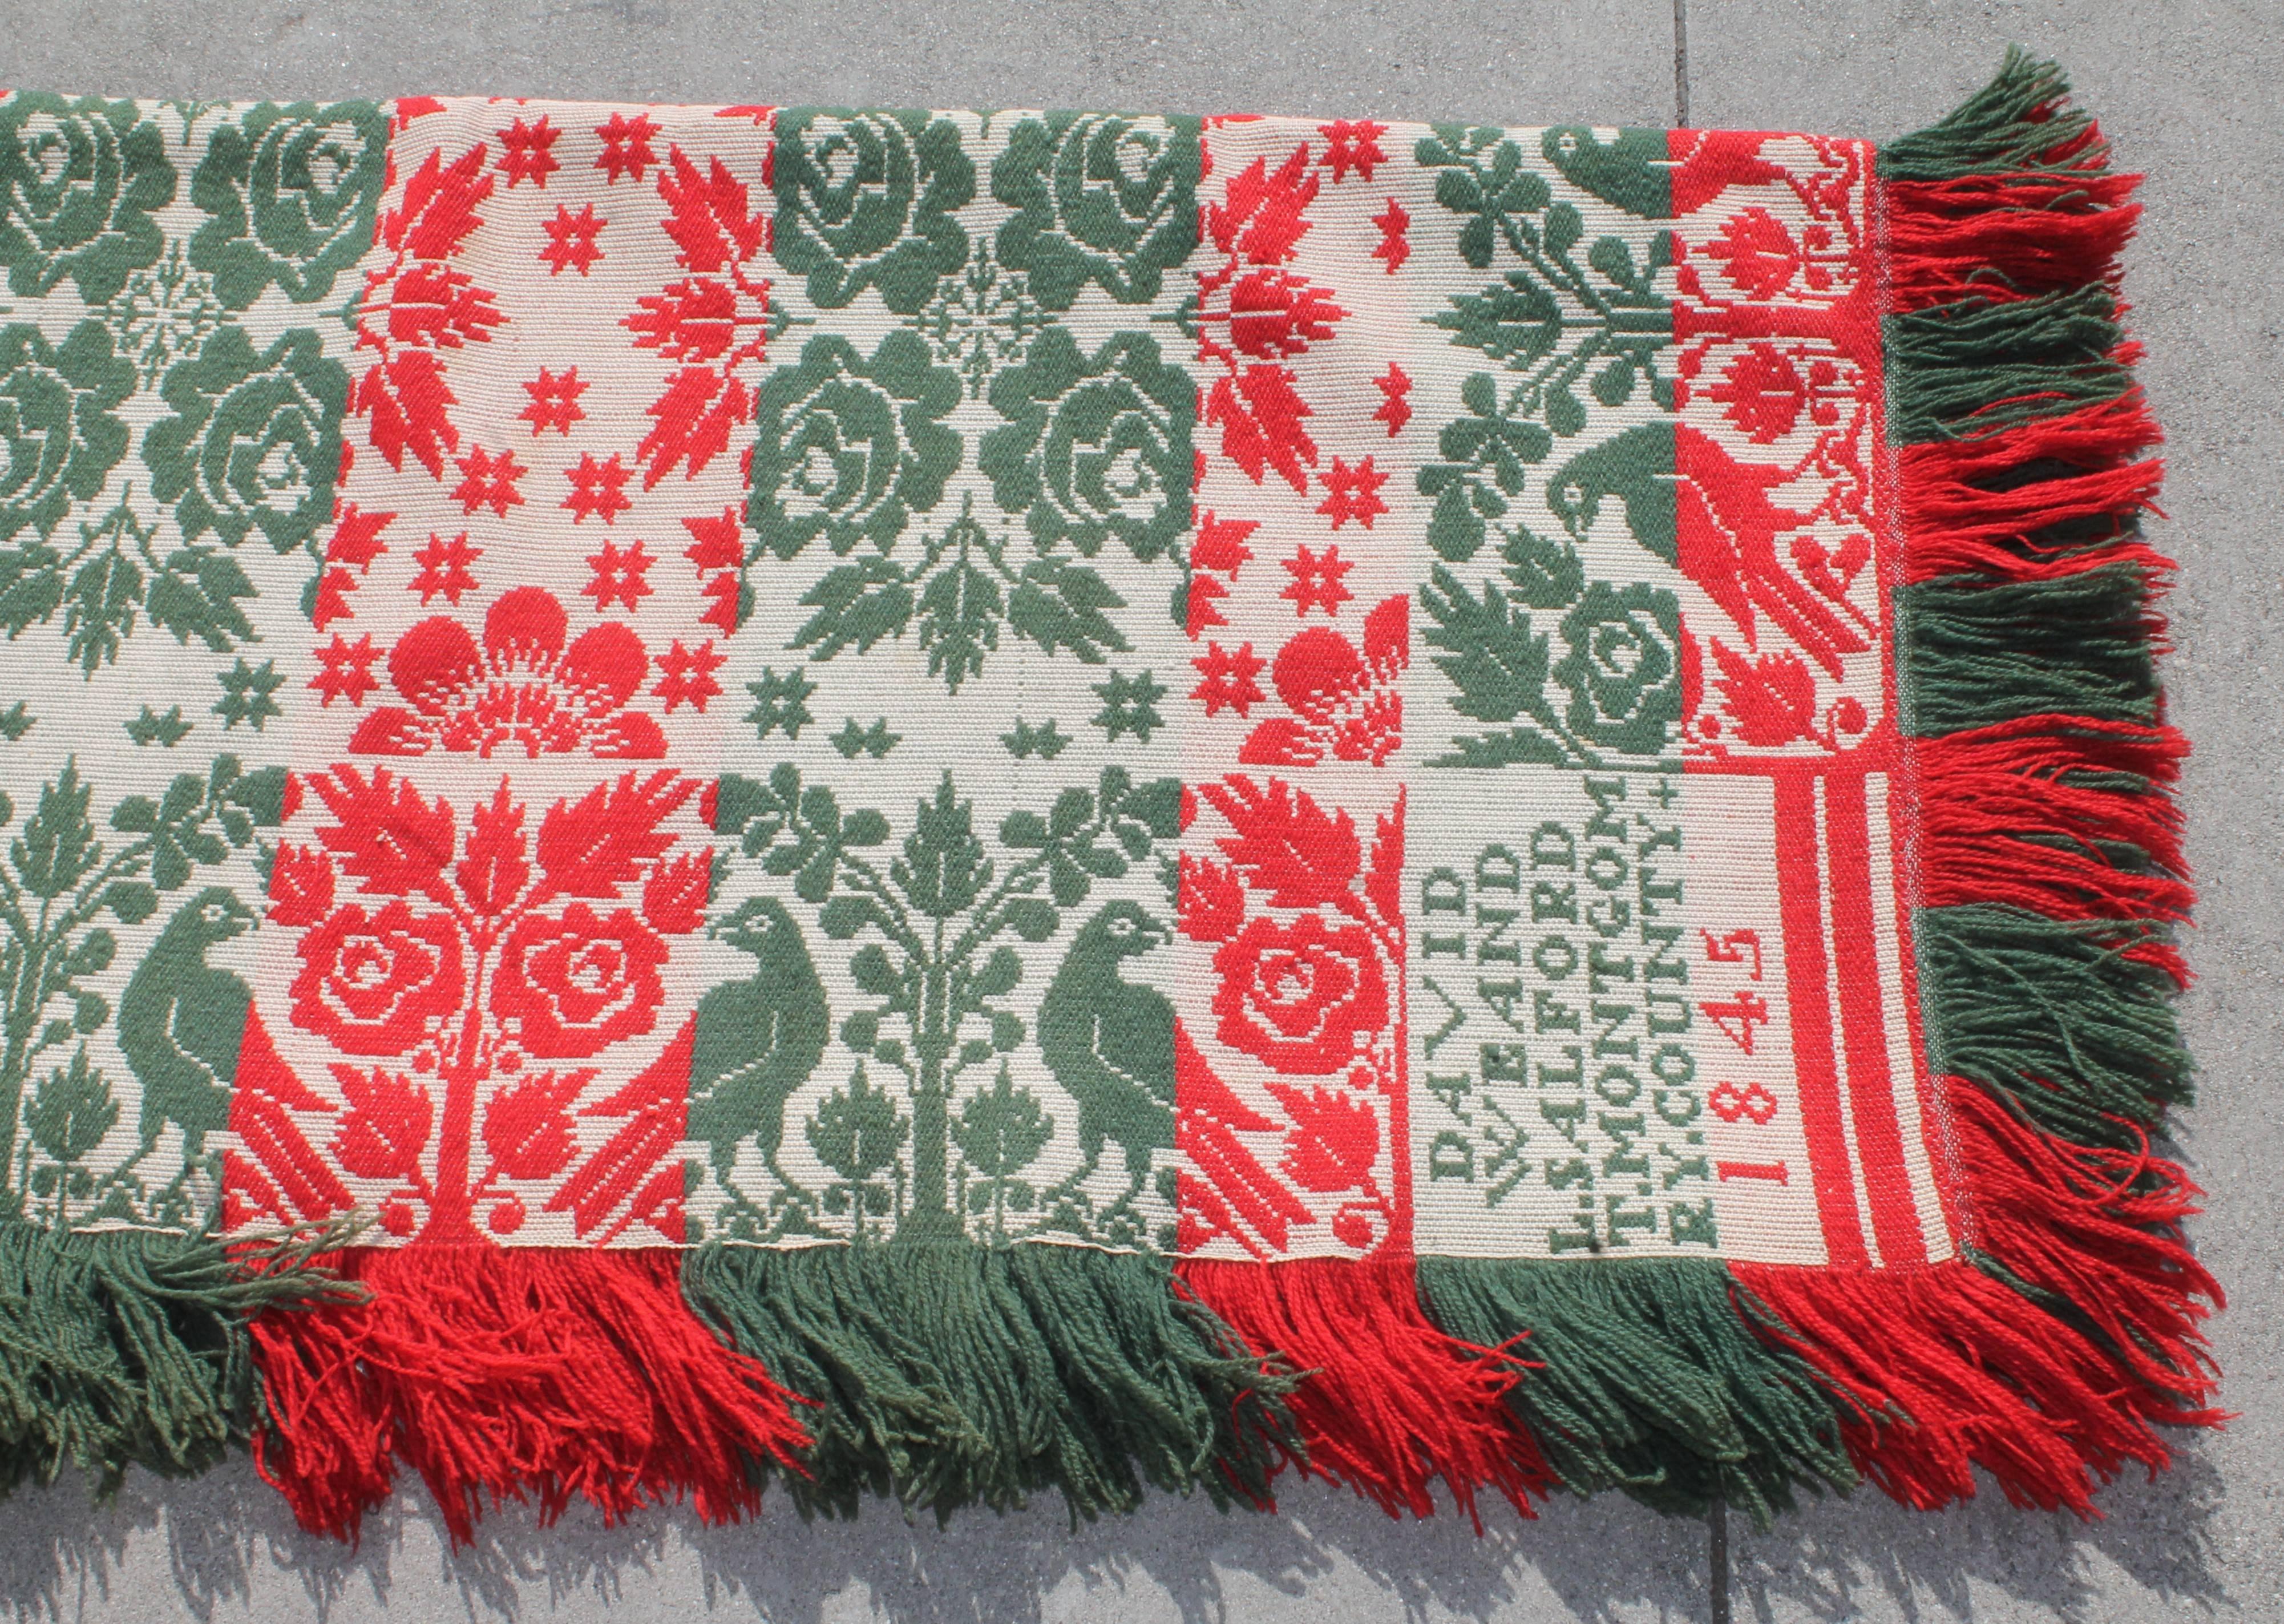 This fine Pennsylvania red and green handwoven coverlet with the original fringe is signed : 